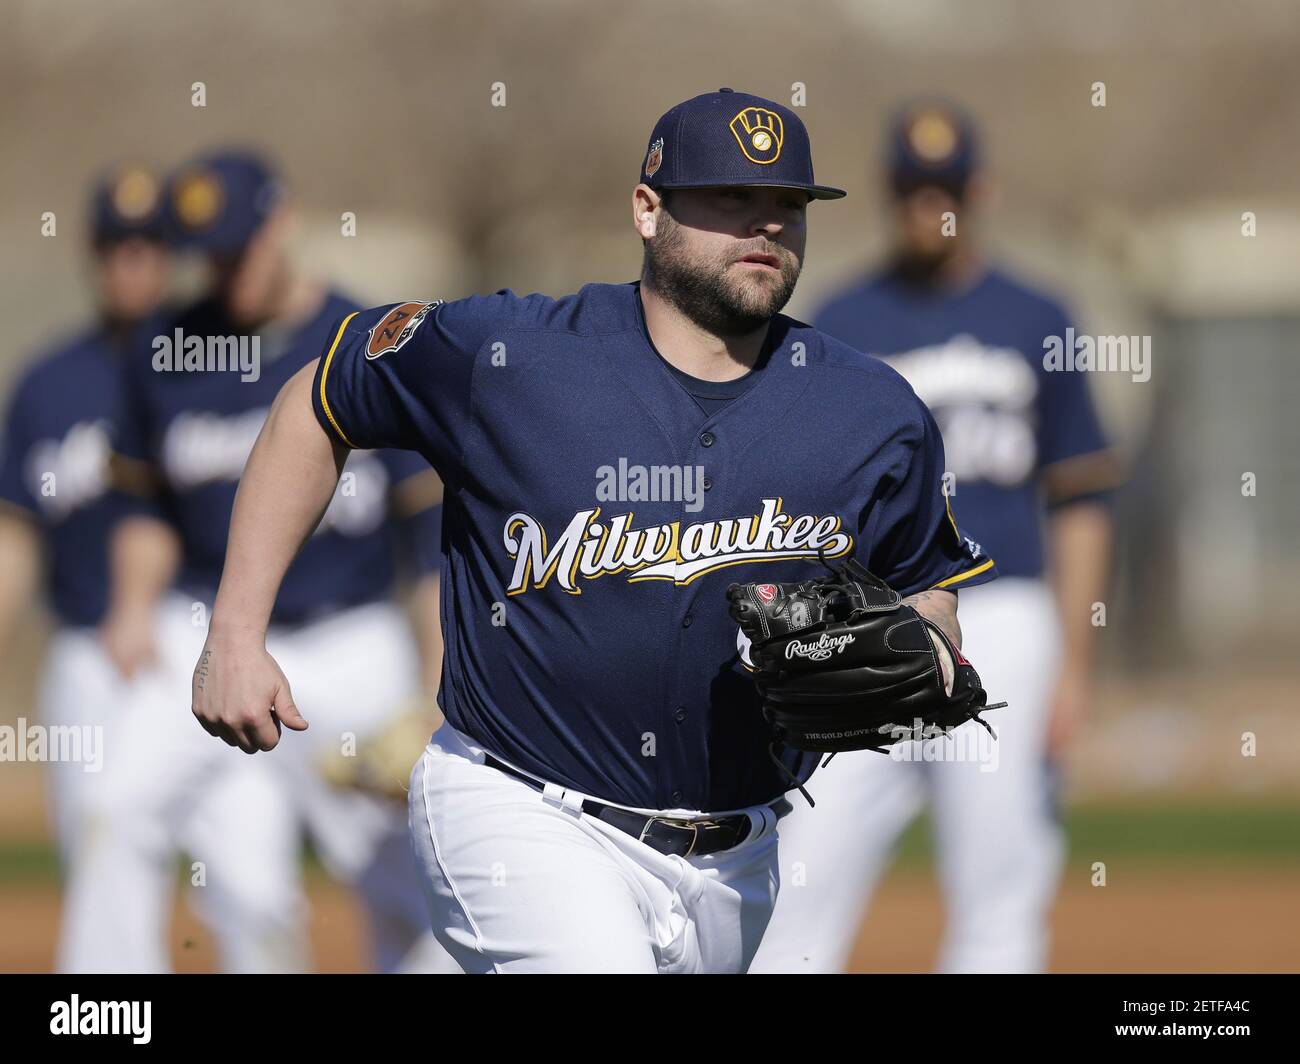 Feb 16, 2017; Maryvale, AZ, USA; Milwaukee Brewers relief pitcher Joba Chamberlain (62) covers first base during spring training camp drills at Maryvale Baseball Park. Mandatory Credit: Rick Scuteri-USA TODAY Sports *** Please Use Credit from Credit Field *** Stock Photo